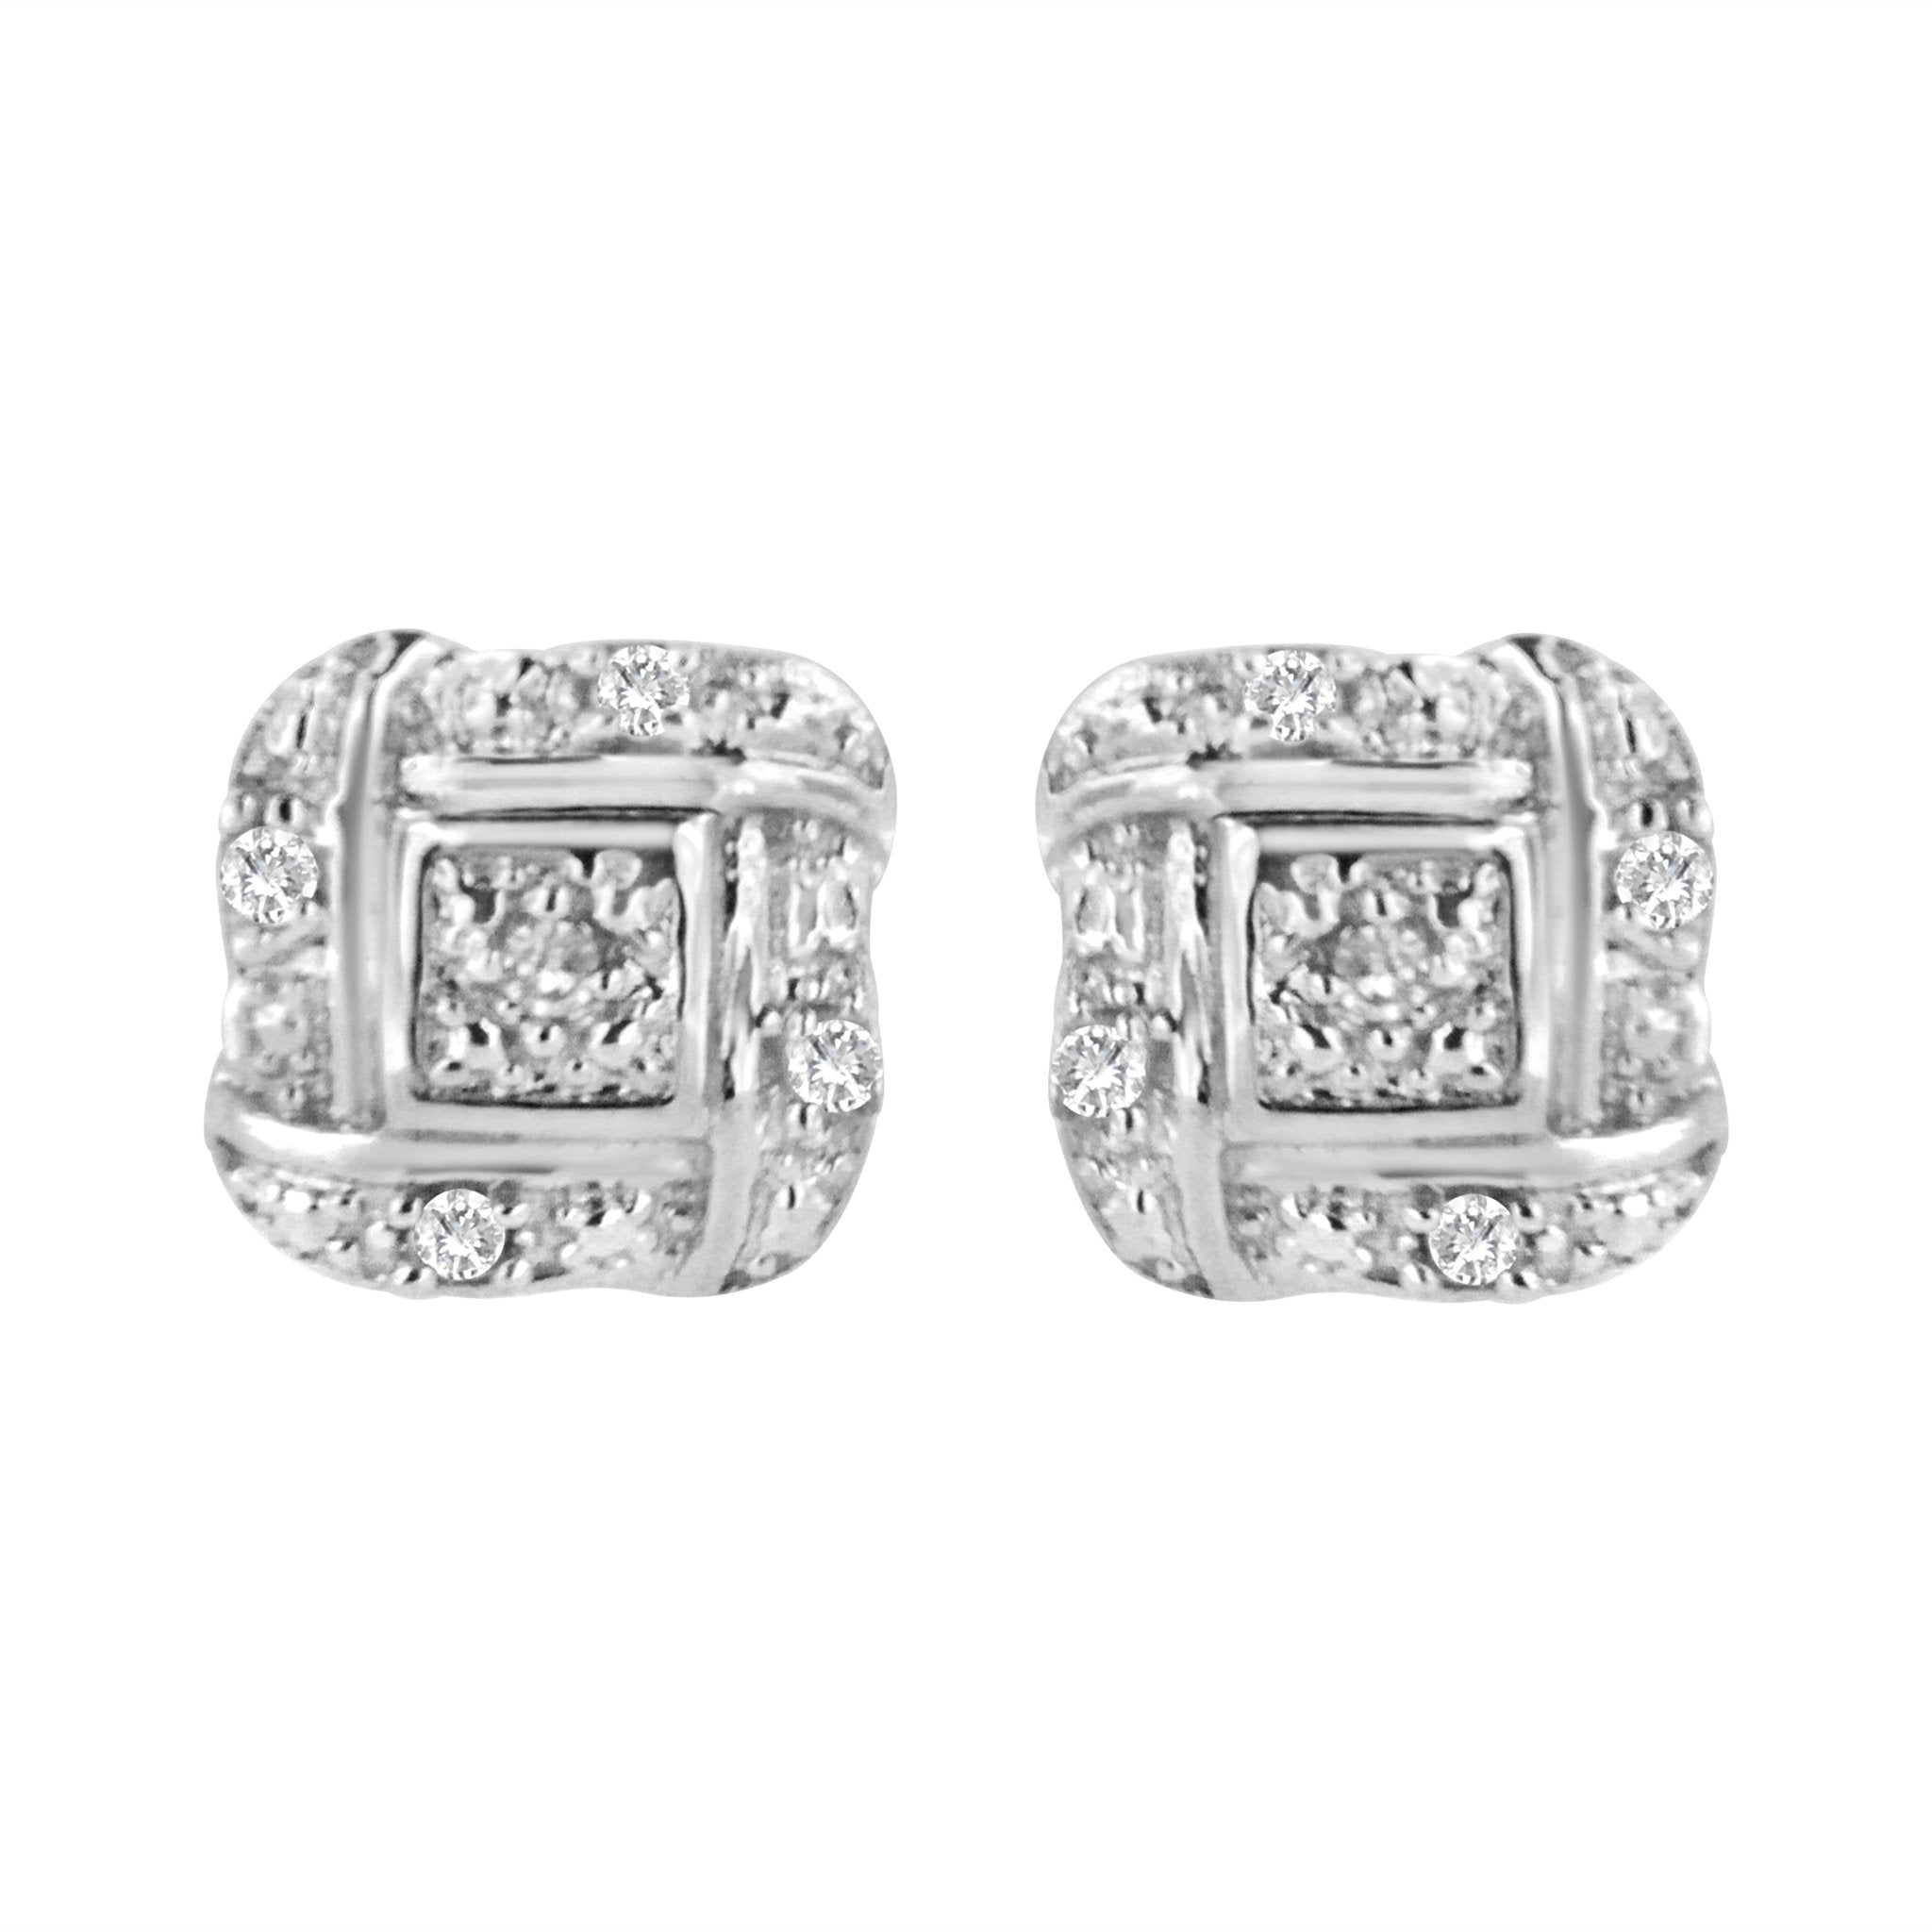 .925-Sterling-Silver-Round-Cut-Diamond-Accent-Swirl-Square-Knot-Stud-Earrings-(H-I-Color,-I2-I3-Clarity)-Earrings